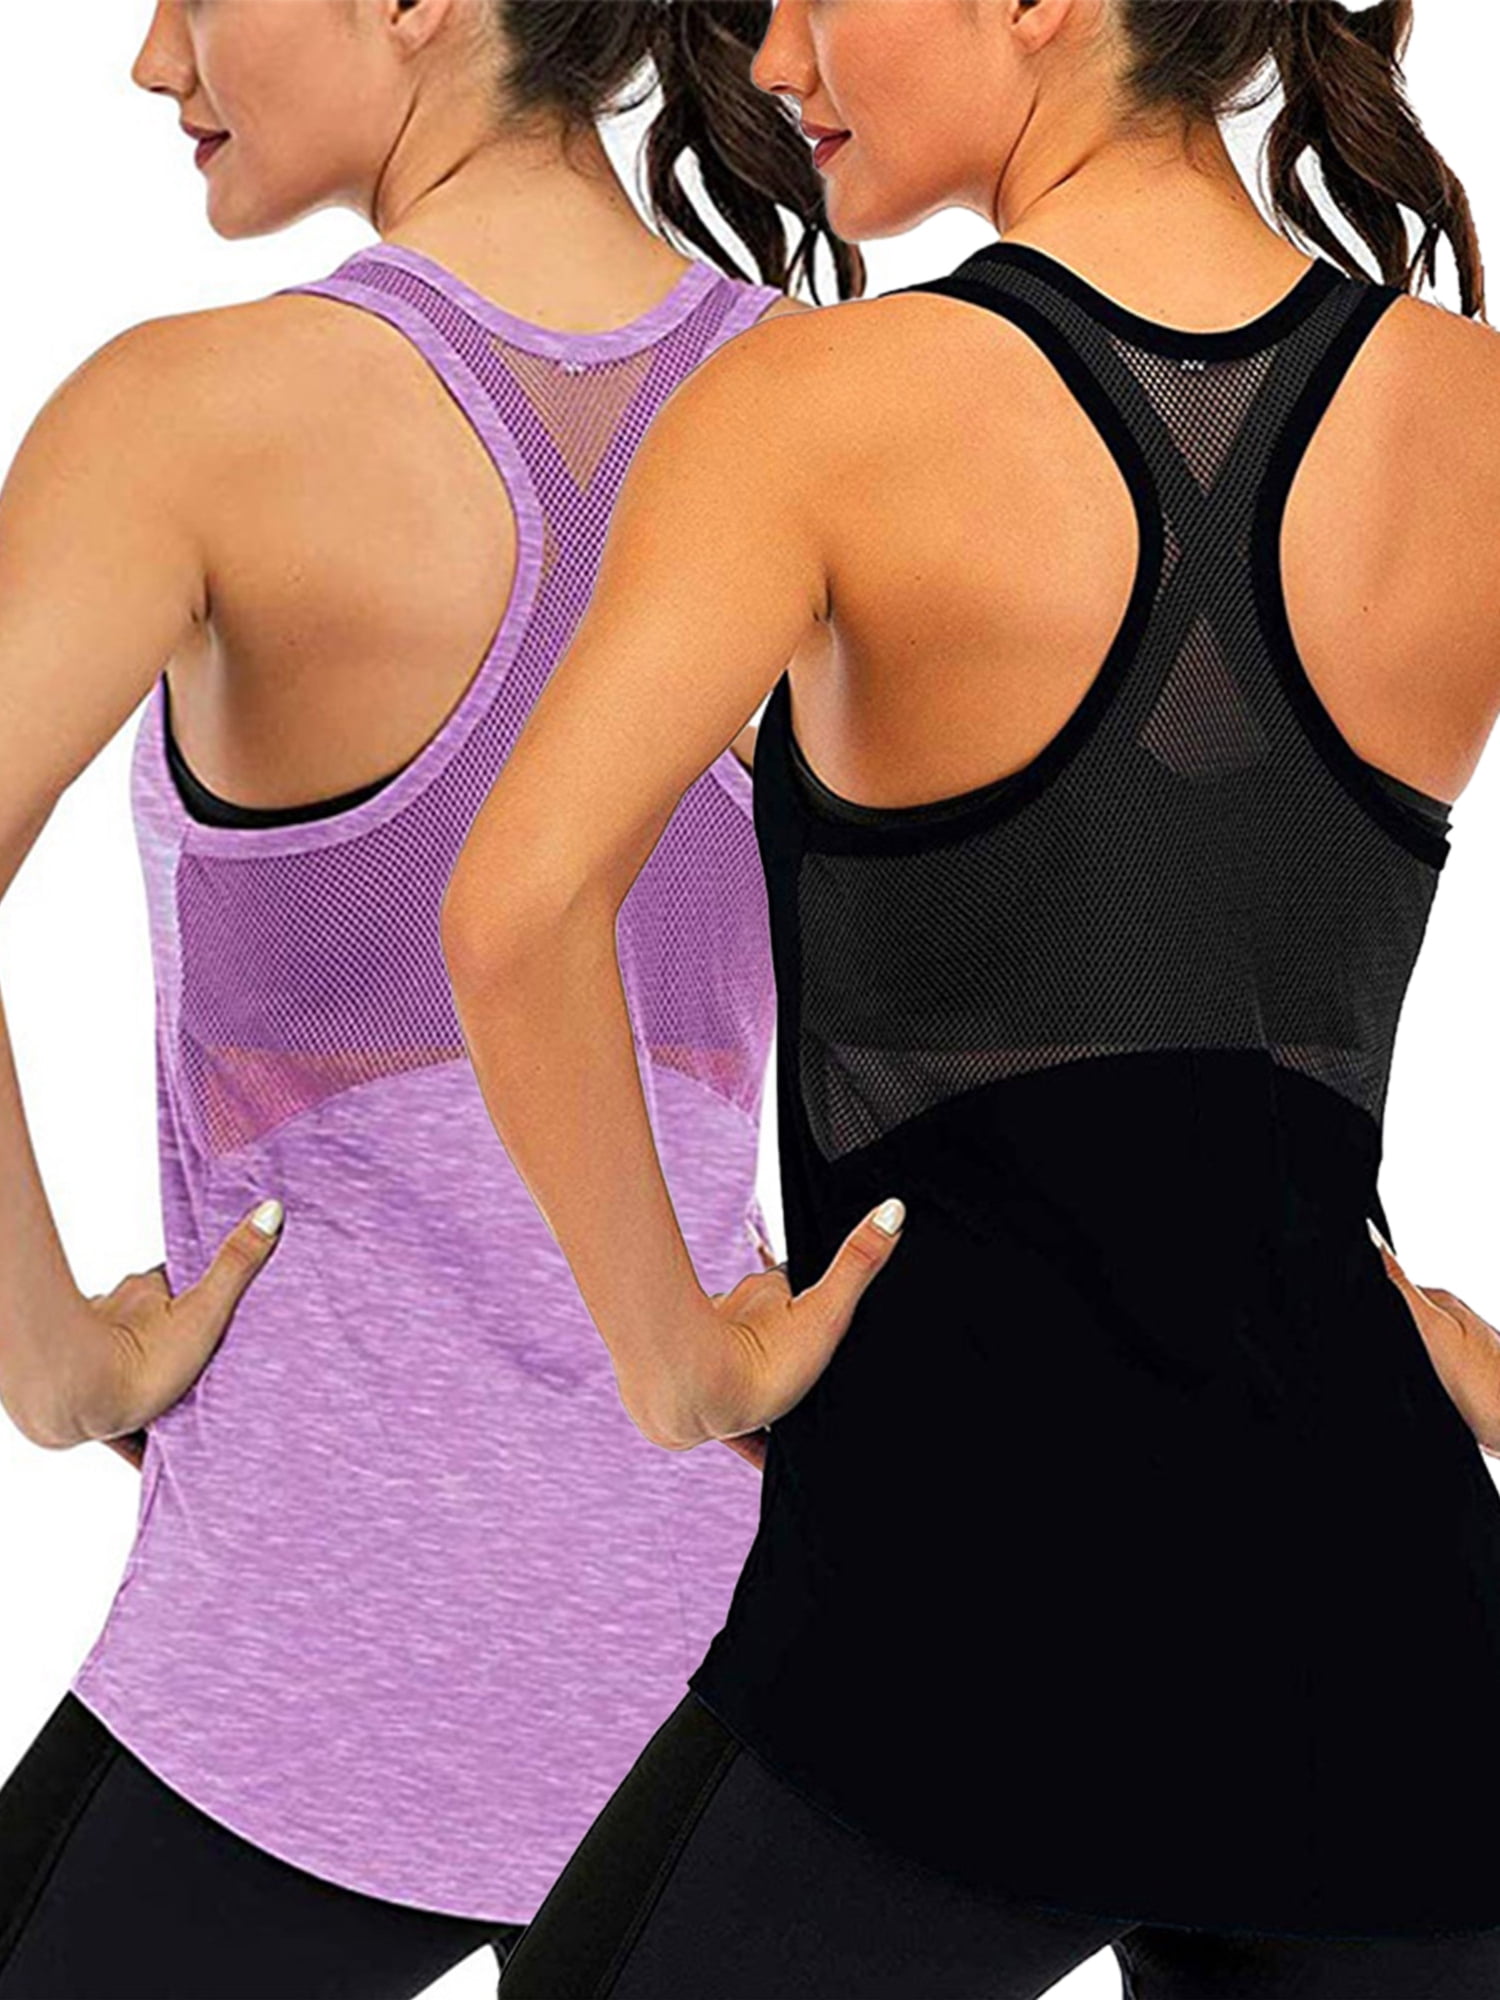 Workout The Perfect Sculpt Sweat Vest -Waist Trainer Sauna Suit Athletic Top for Women Running Exercise & Workout Accessories